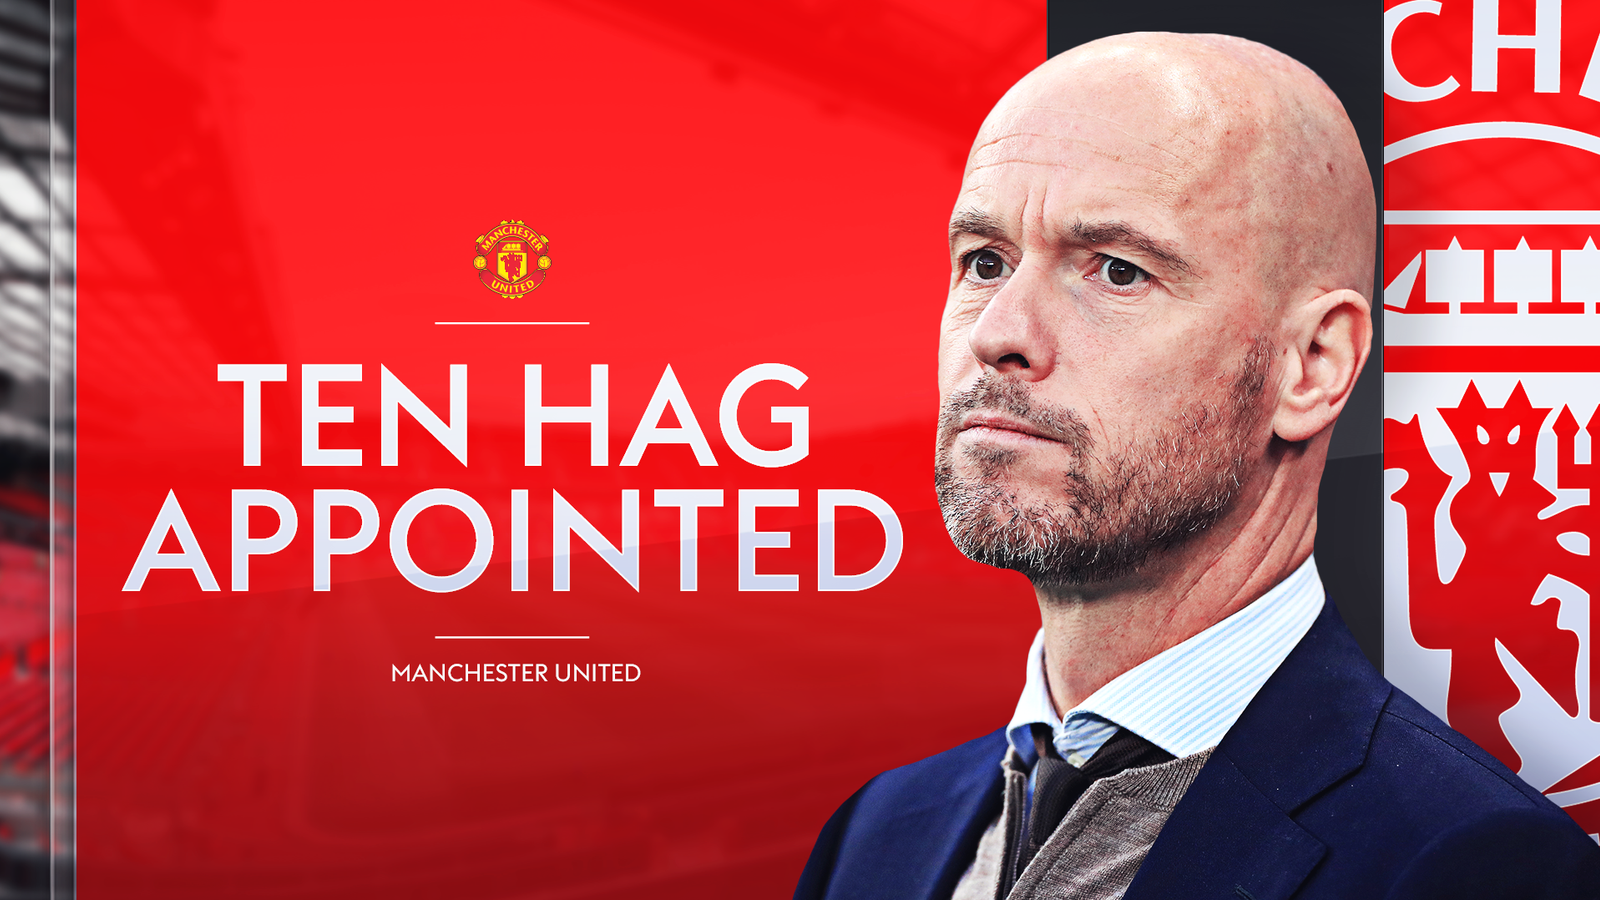 Erik ten Hag Manchester United appoint Ajax boss as new manager